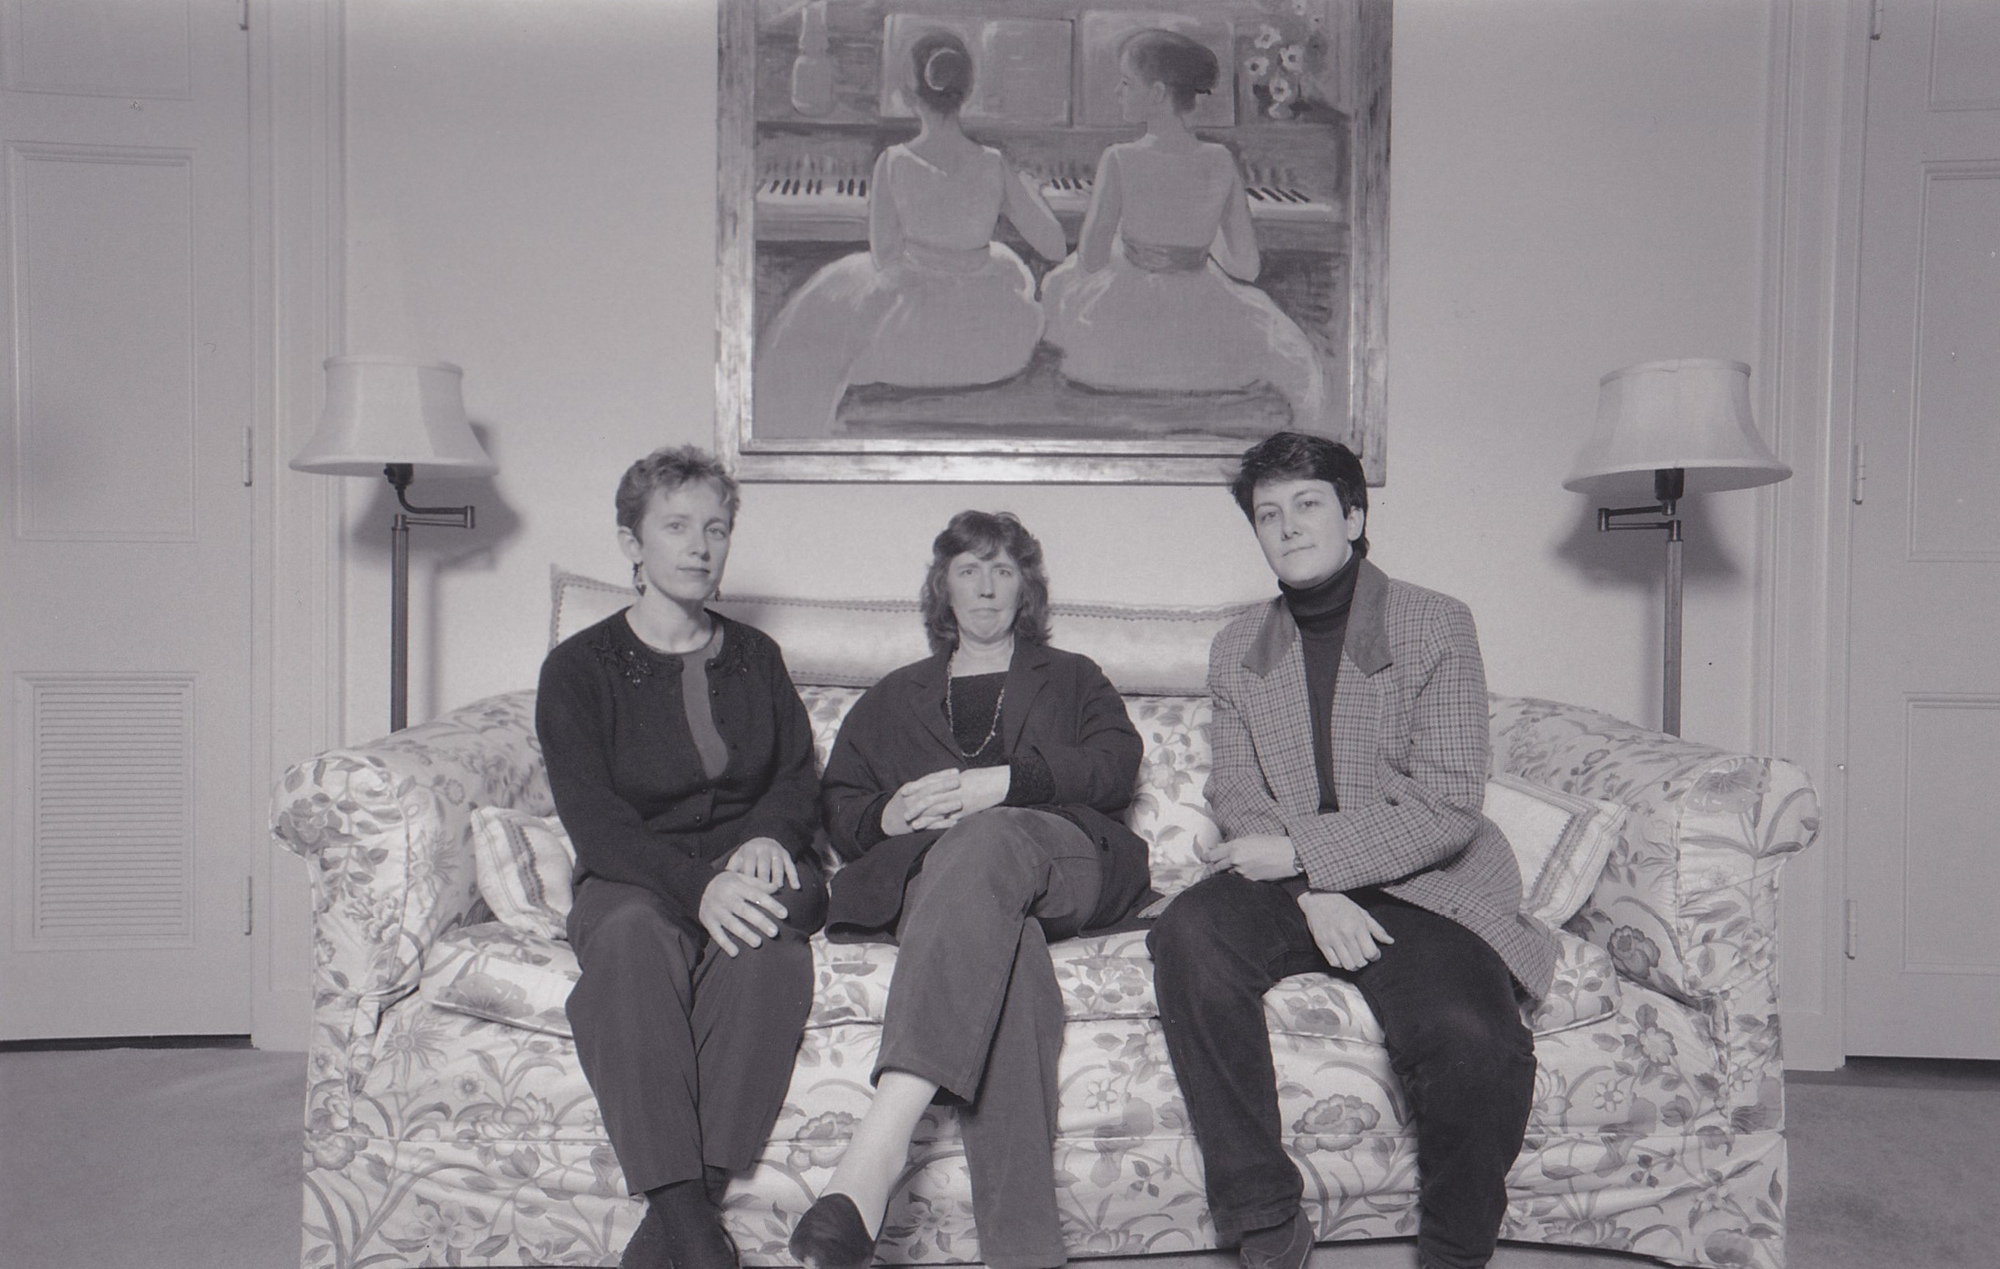 Linda Reichert, Joan Tower, and Jennifer Higdon seated together on a couch in 1995 (Photo by Don Springer)